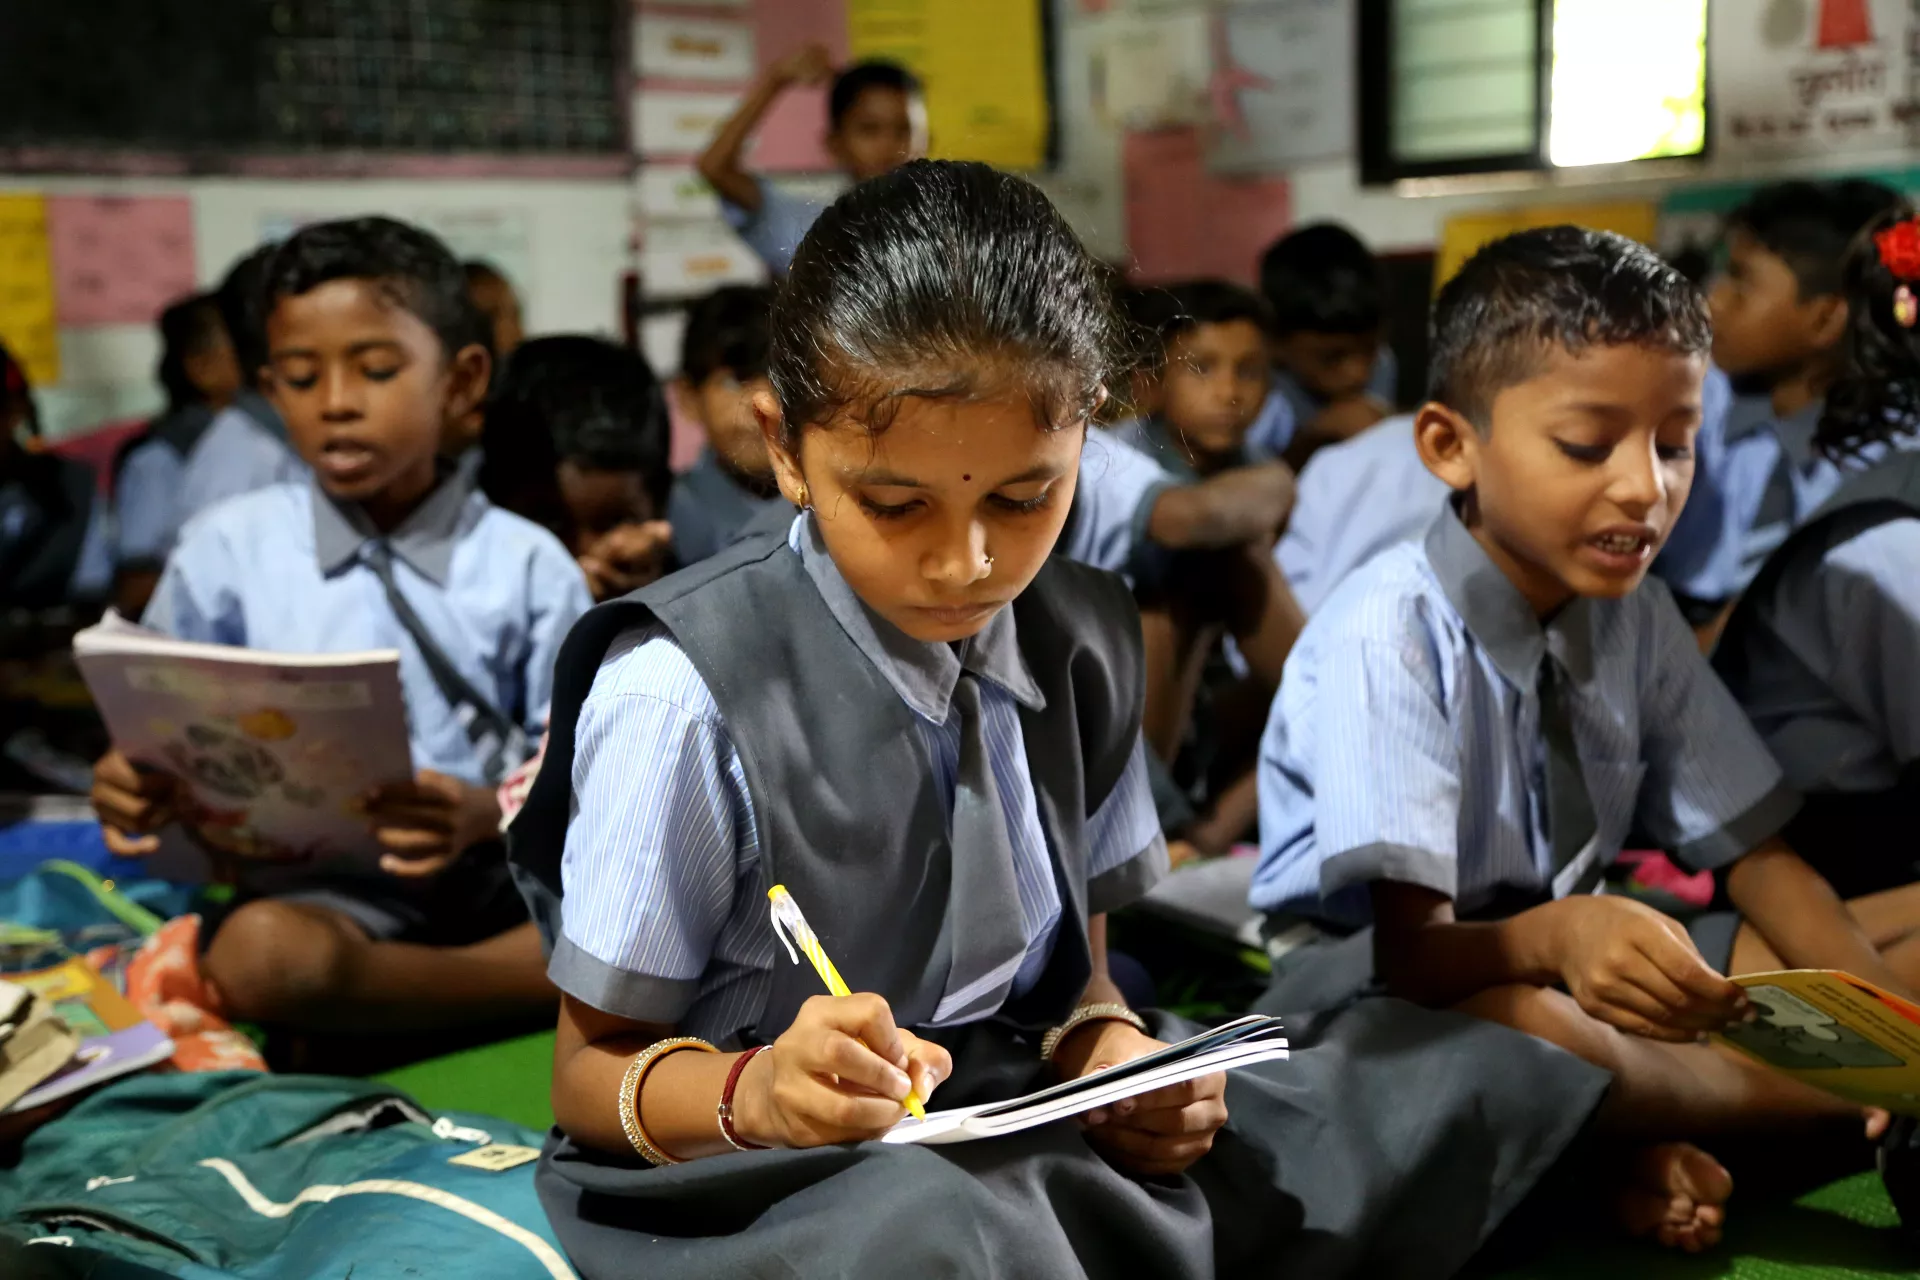 Nine-year-old Avantika,  pictured while writing in her classroom in India.